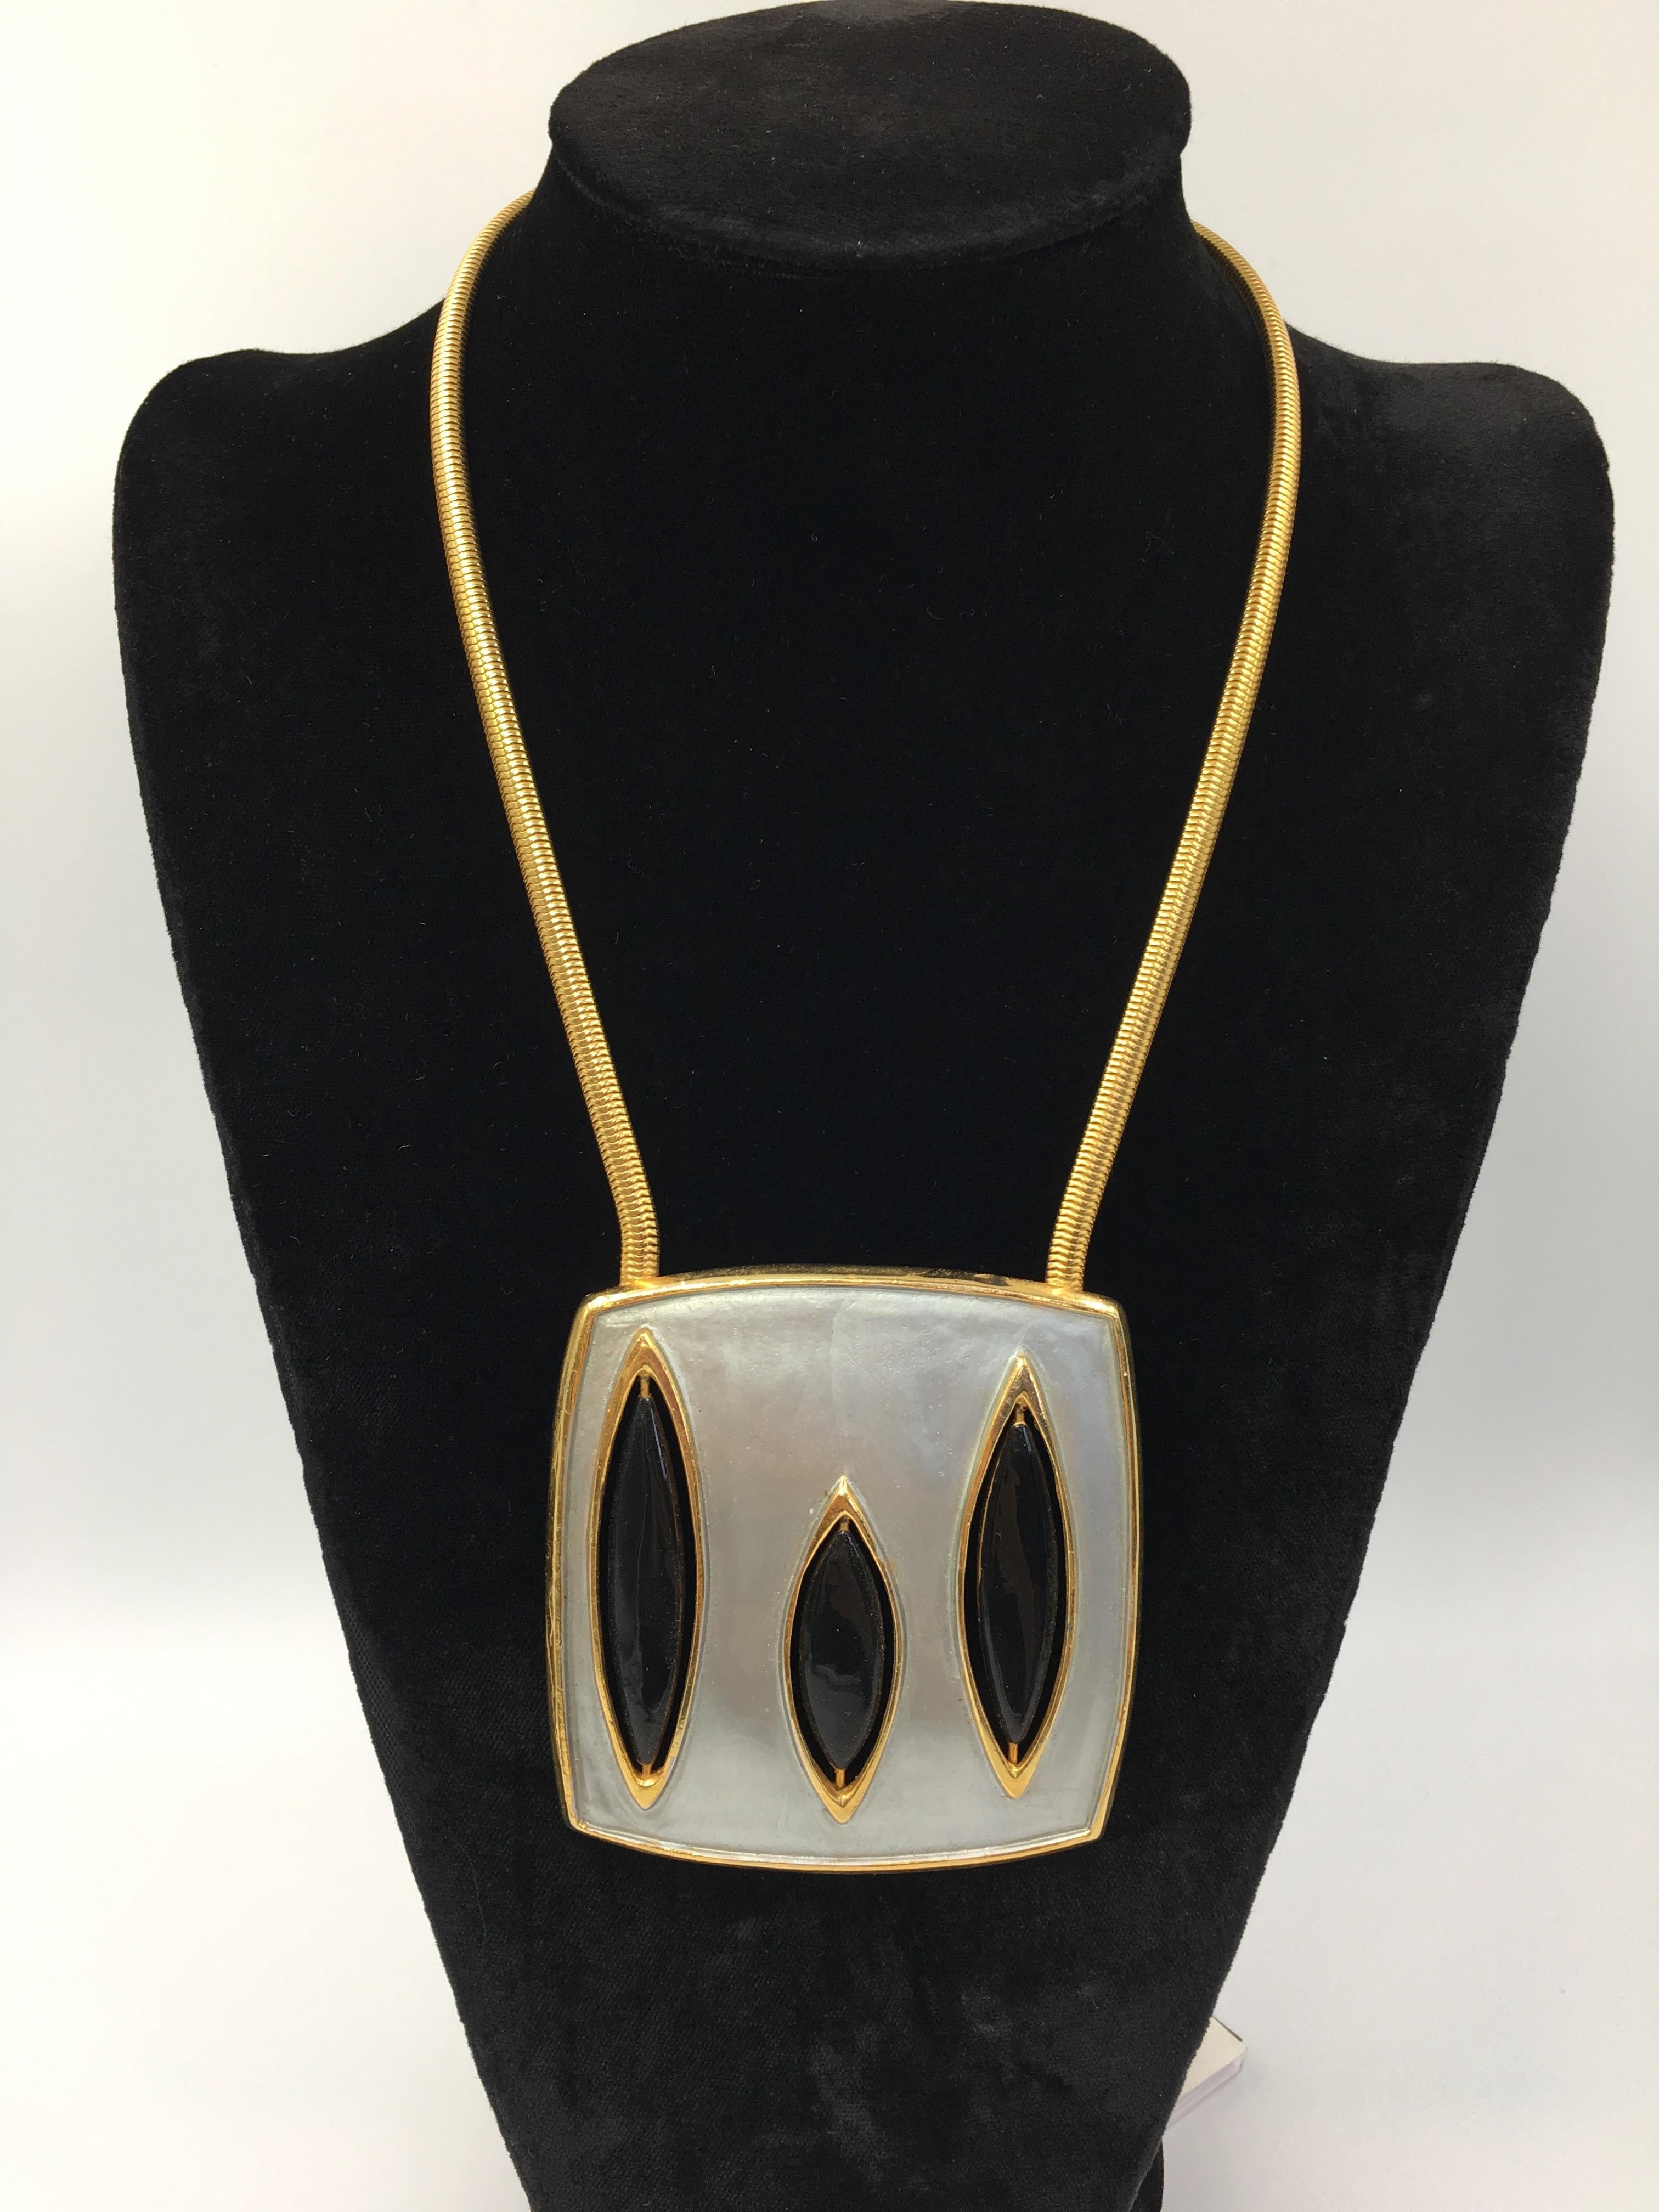 Pierre Cardin Mid-Century Modern Gold Tone and Enamel Necklace For Sale 1